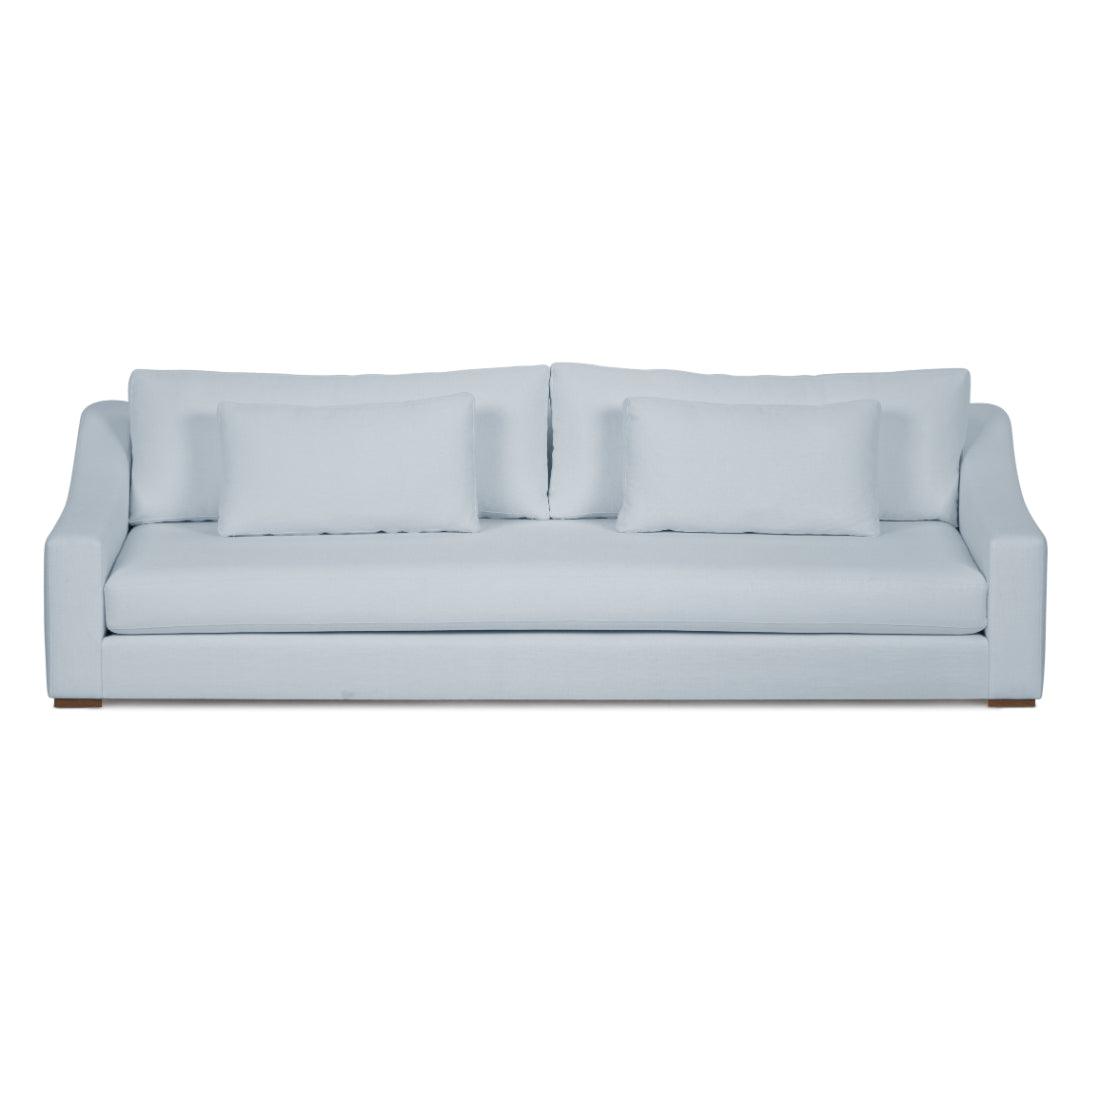 Hilary Handcrafted Sustainable Stain Reistant Sofa - Uptown Sebastian